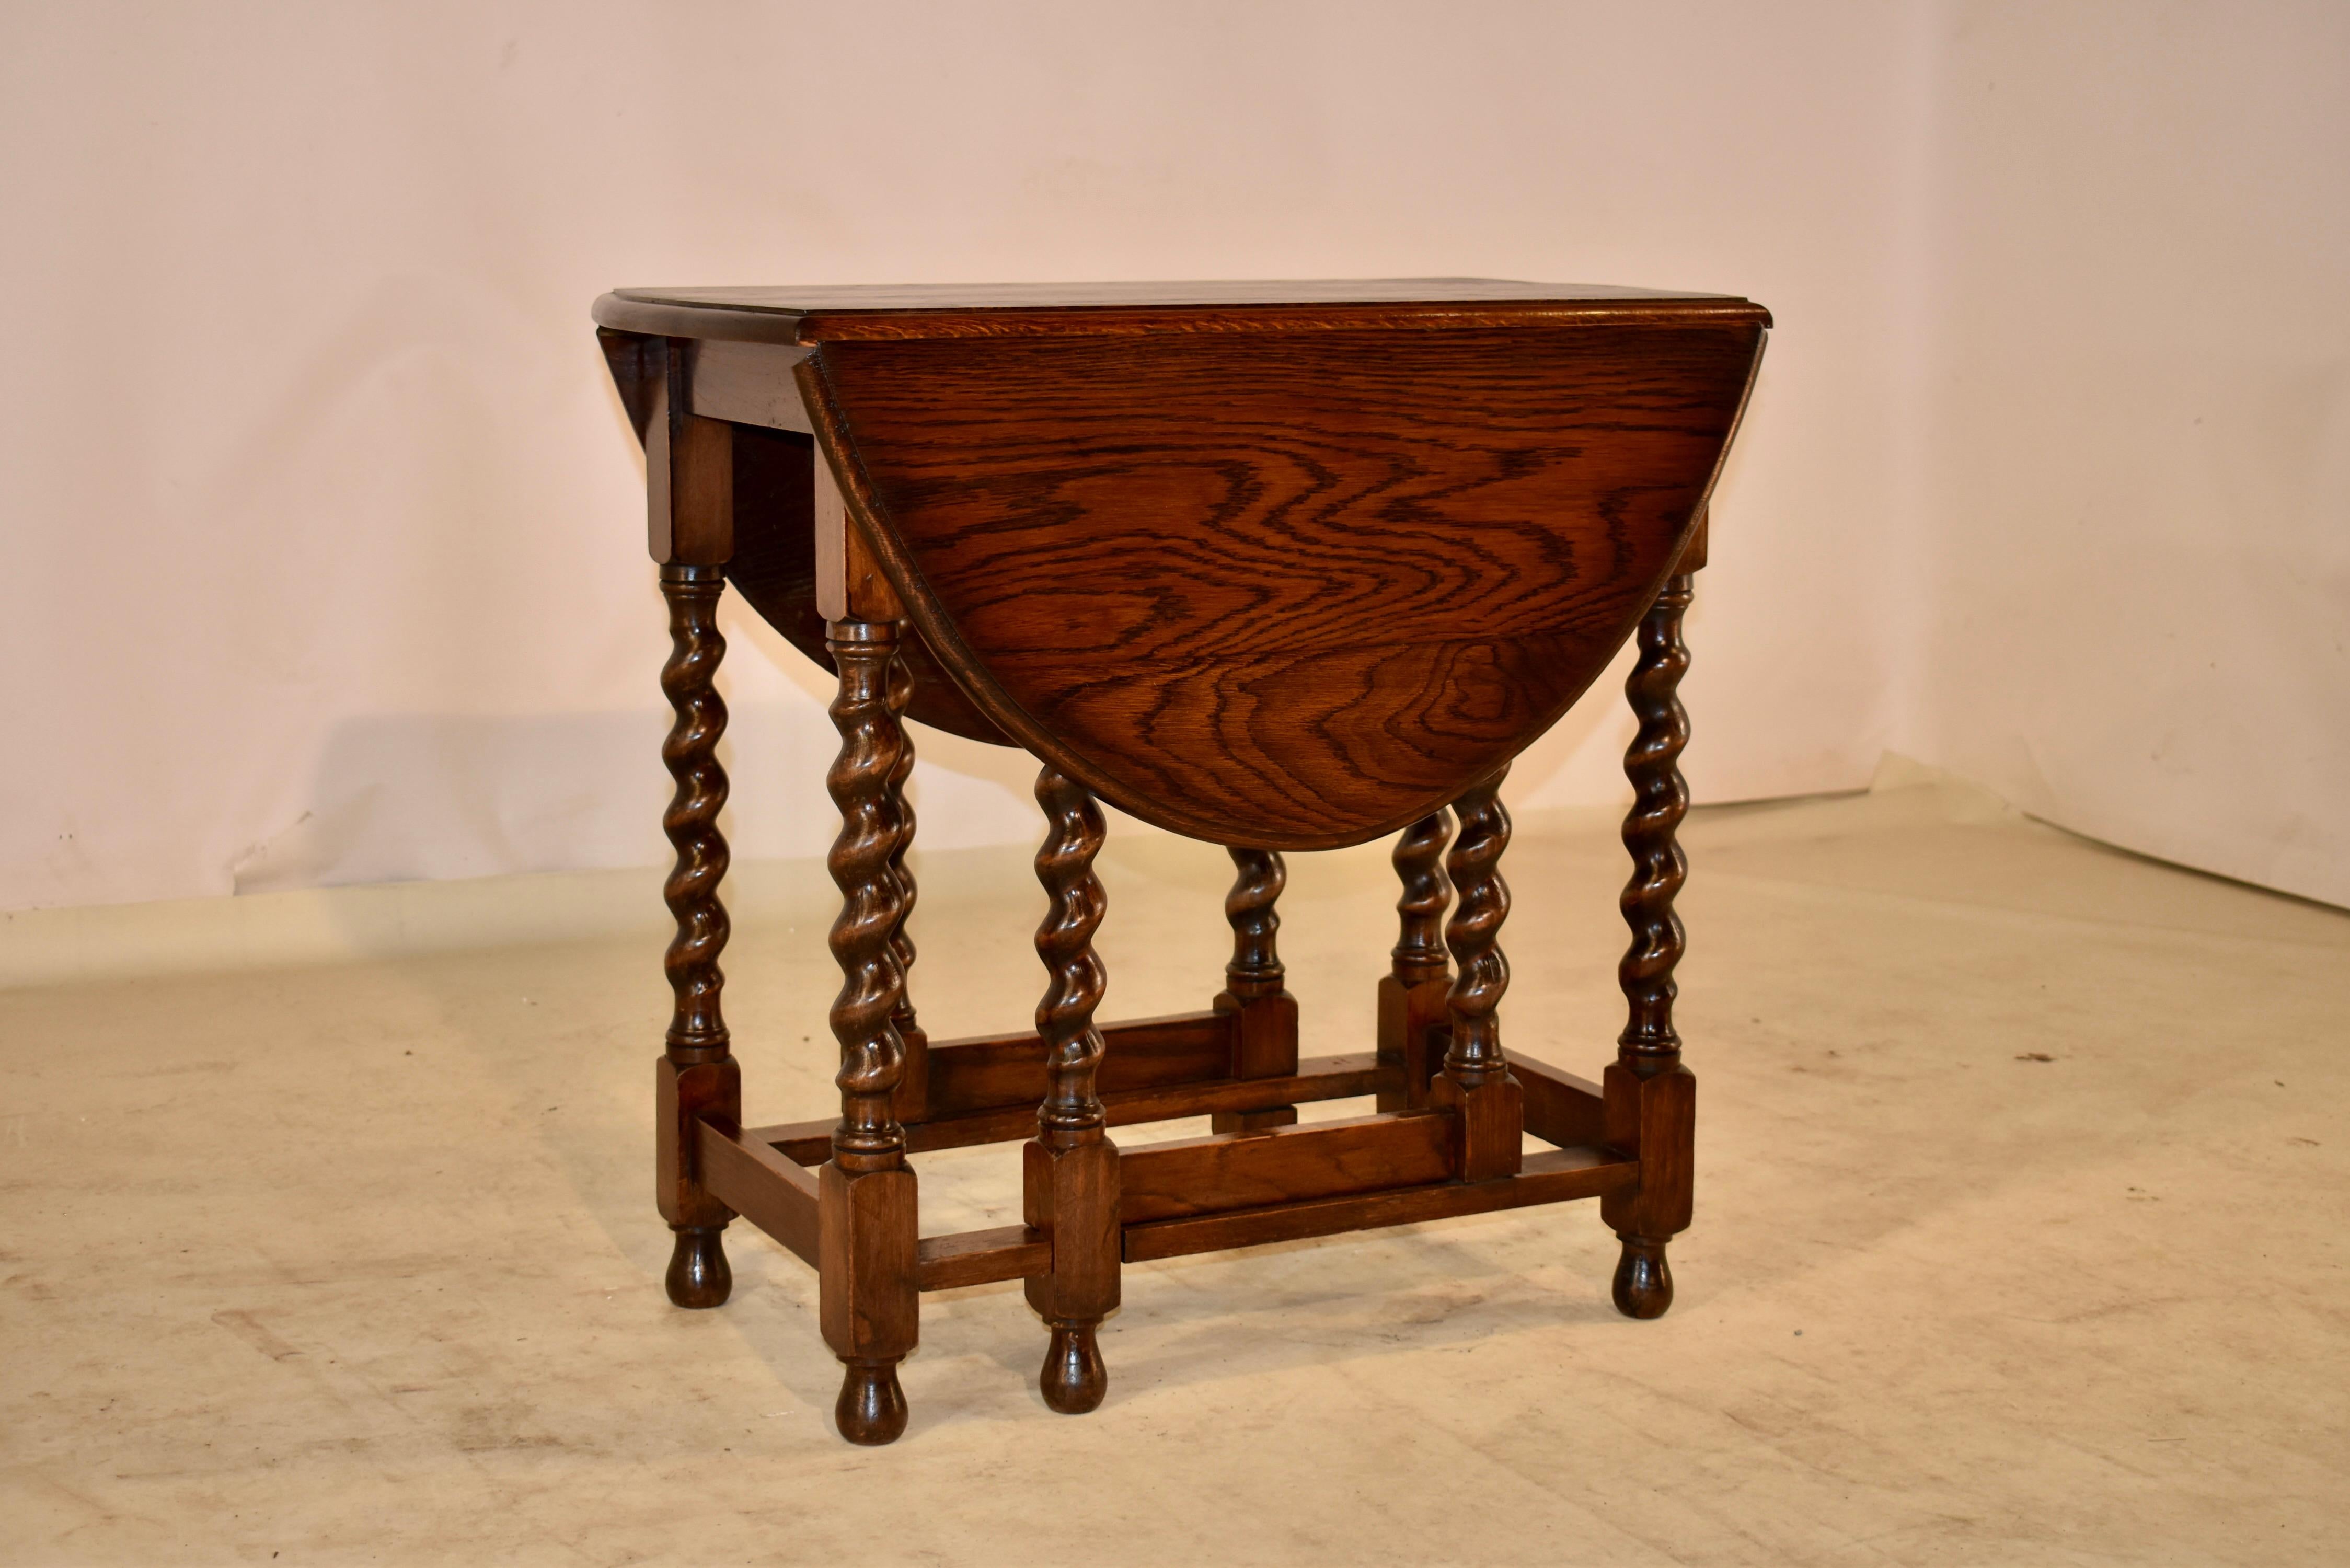 Circa 1900 oak gate leg table from England with a beveled edge around the vividly figured top, following down to simple aprons. the table is supported on hand turned barley twist legs, joined by simple stretchers and raised on hand turned feet. The